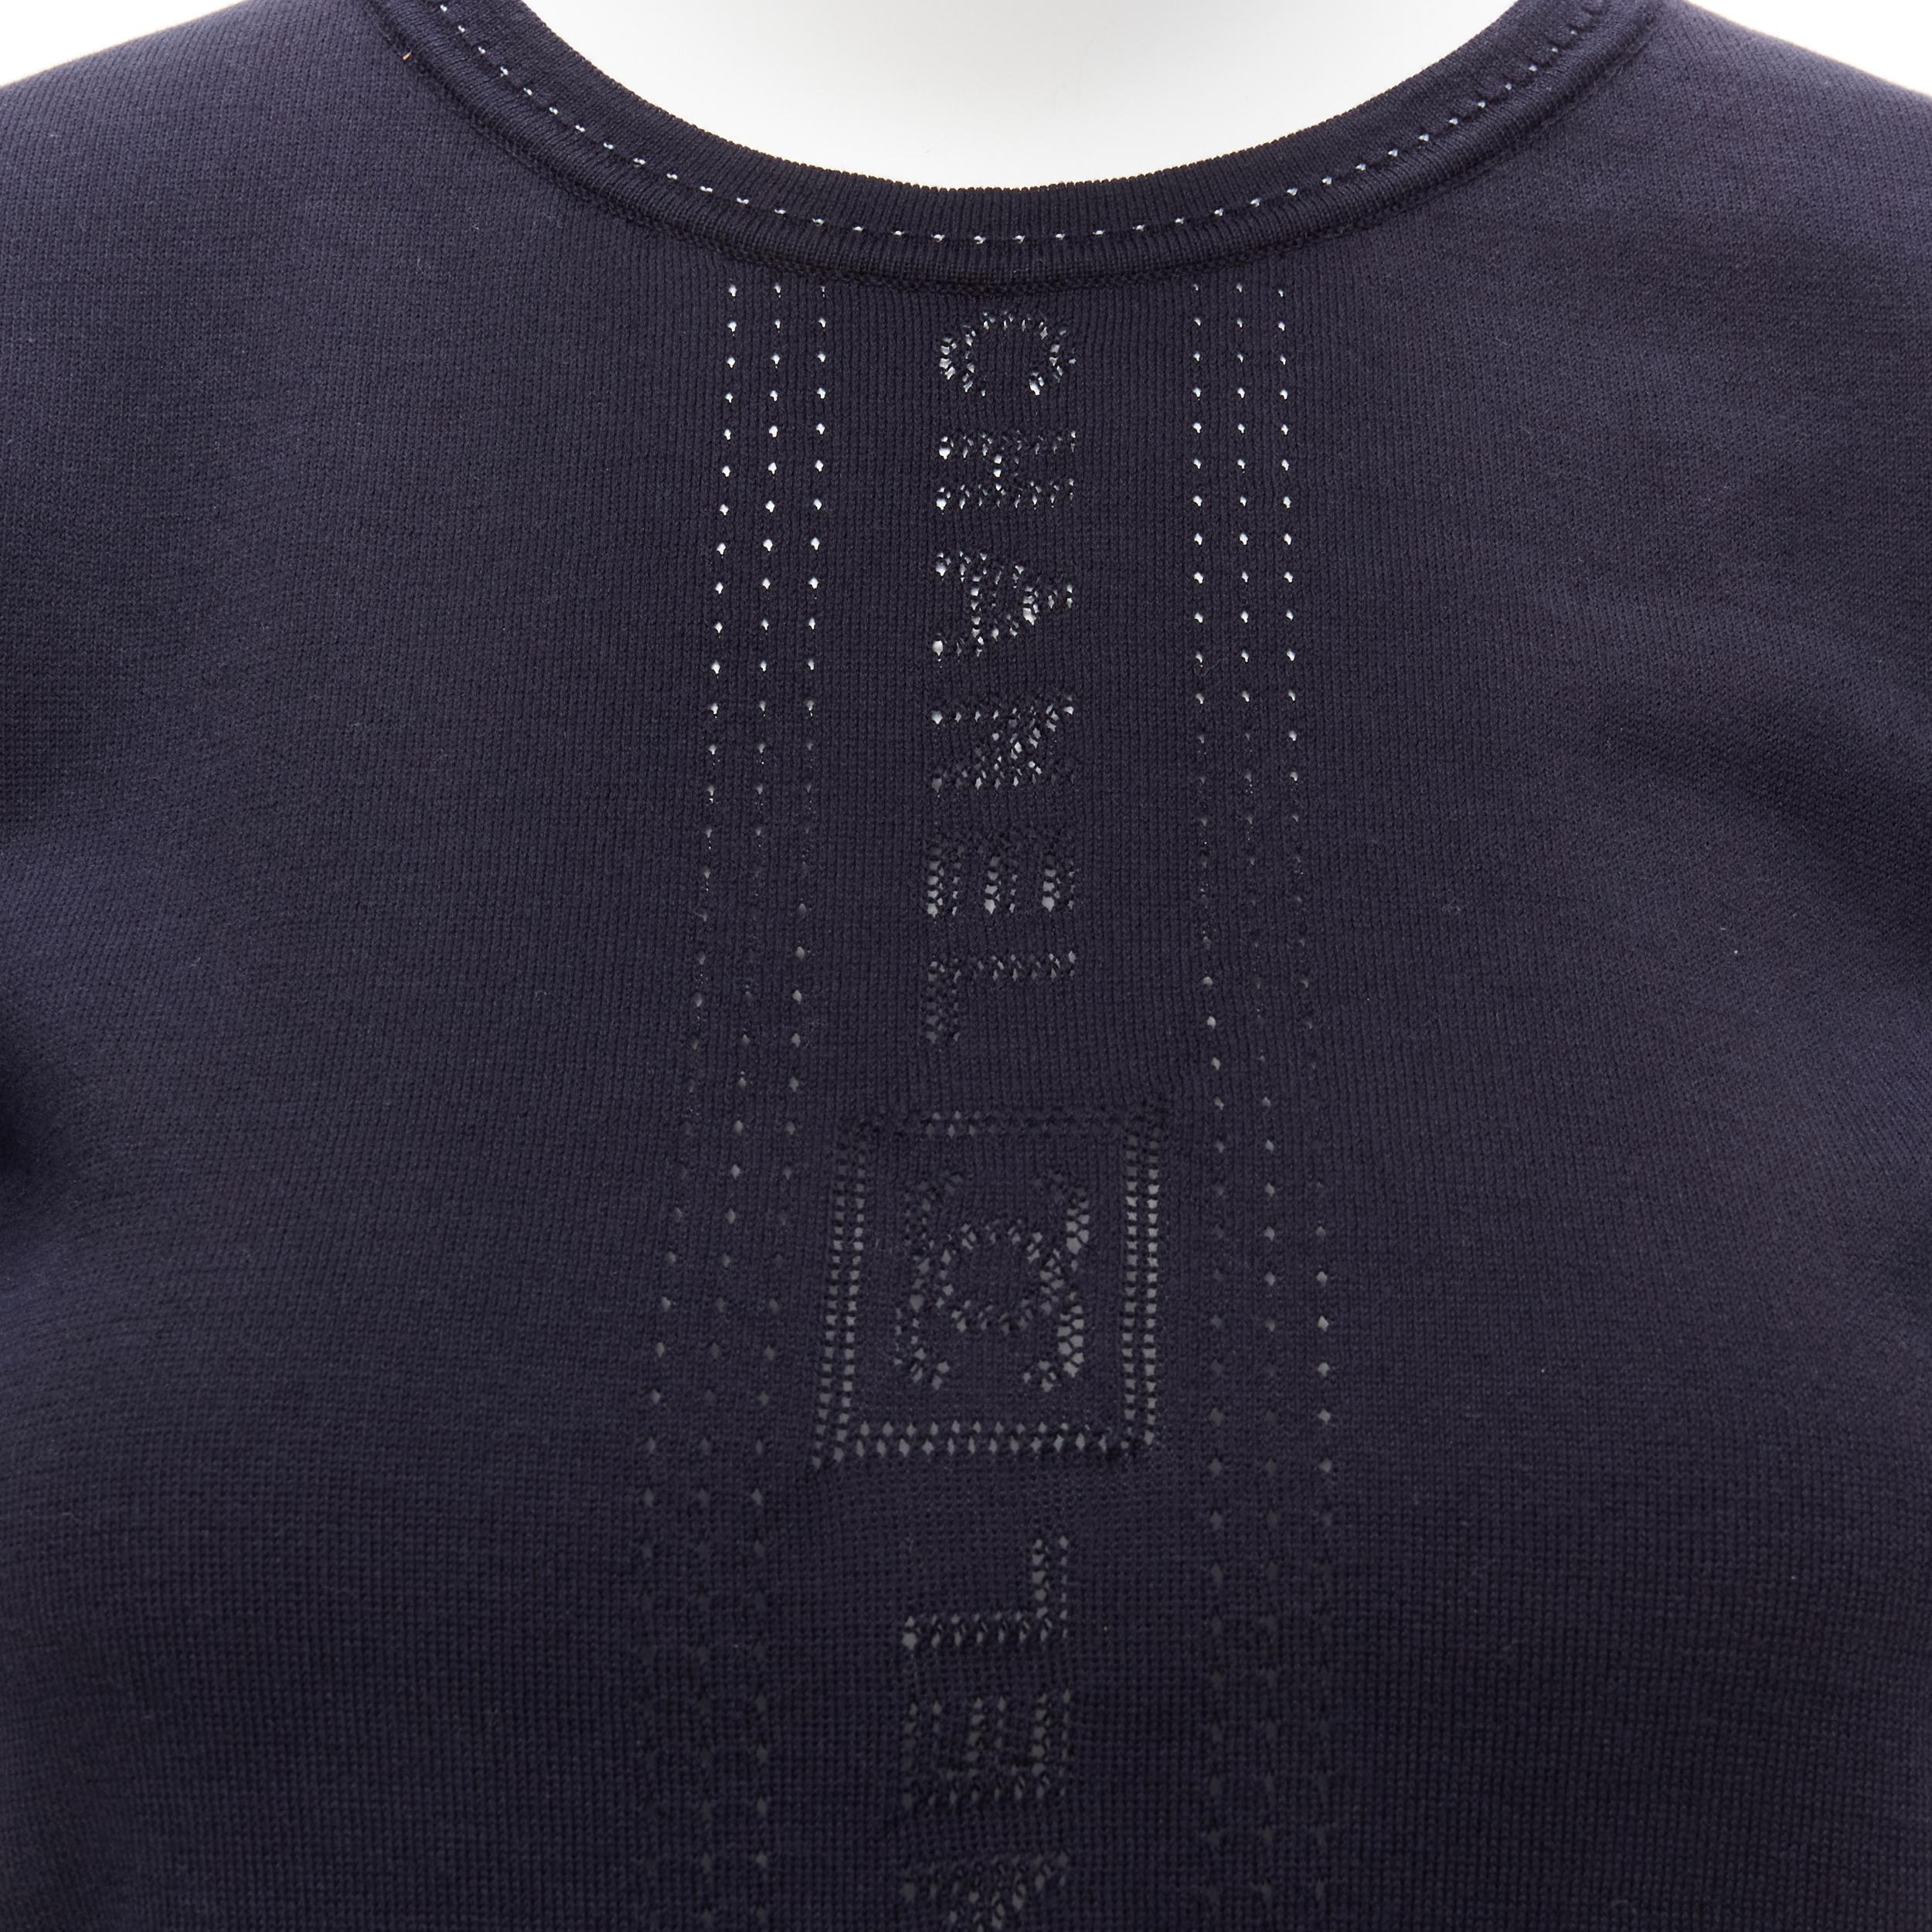 CHANEL SPORTS 07C Vintage navy CC logo perforated short sleeve top FR36 S
Reference: TGAS/D00304
Brand: Chanel
Designer: Karl Lagerfeld
Collection: Sports
Material: Cotton
Color: Navy, White
Pattern: Solid
Closure: Pullover
Extra Details: Discreet